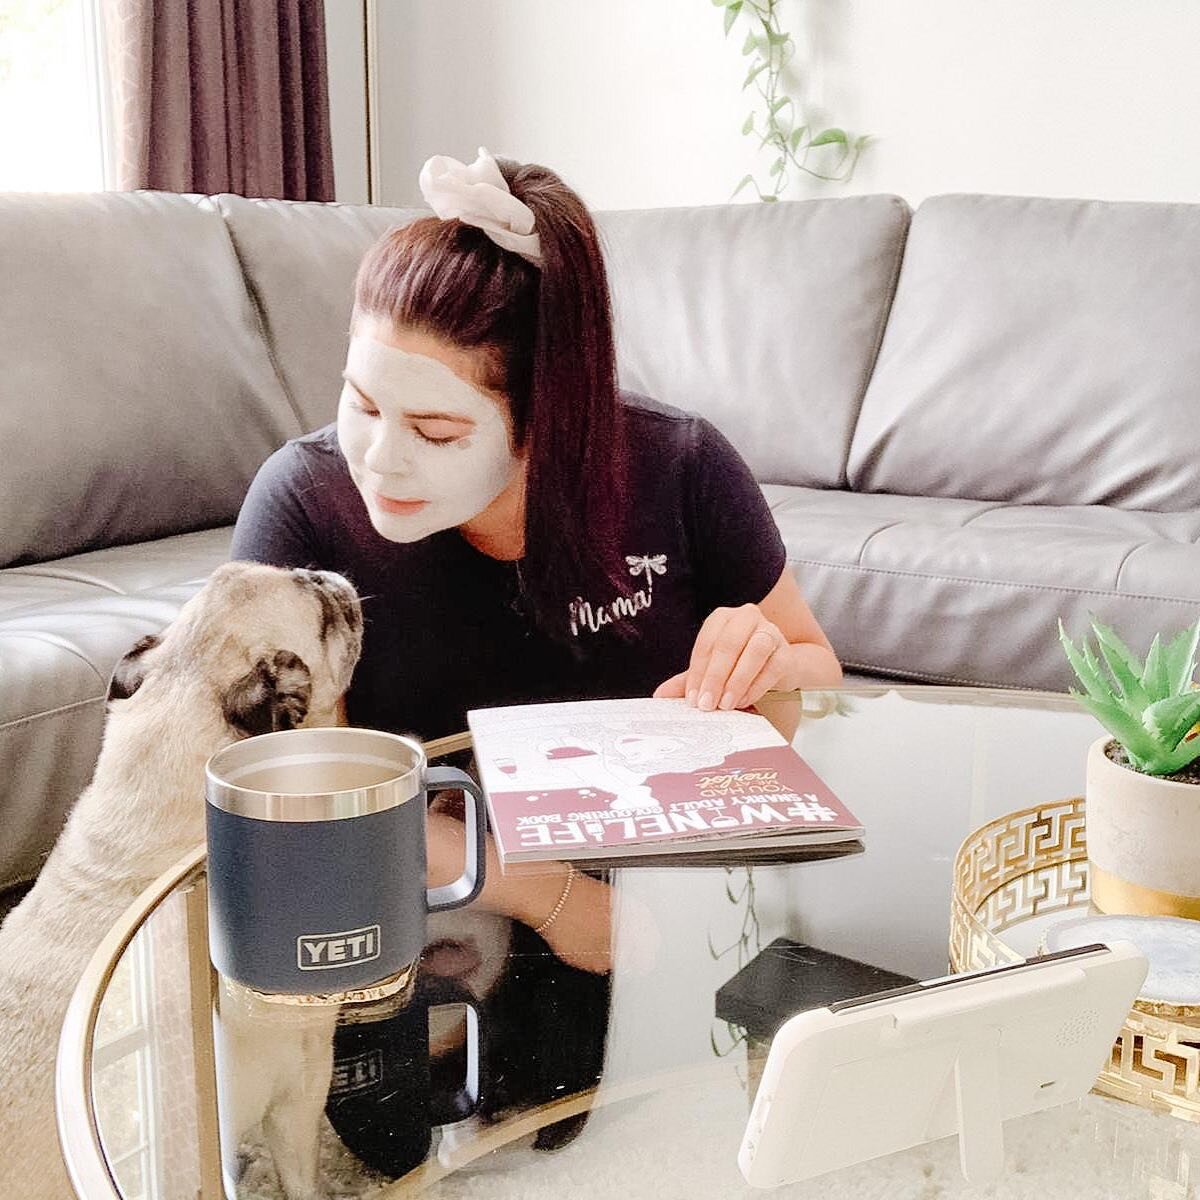 This beautiful Mama, with her @threeshipsbeauty Detox Green Tea Clay mask on, her Mombitious shirt, and her trusty Scrunchie by @skrunch.d
Her baby boy Noah is asleep, so she&rsquo;s enjoying a nice chat with Frank the pug! Can you guess what&rsquo;s